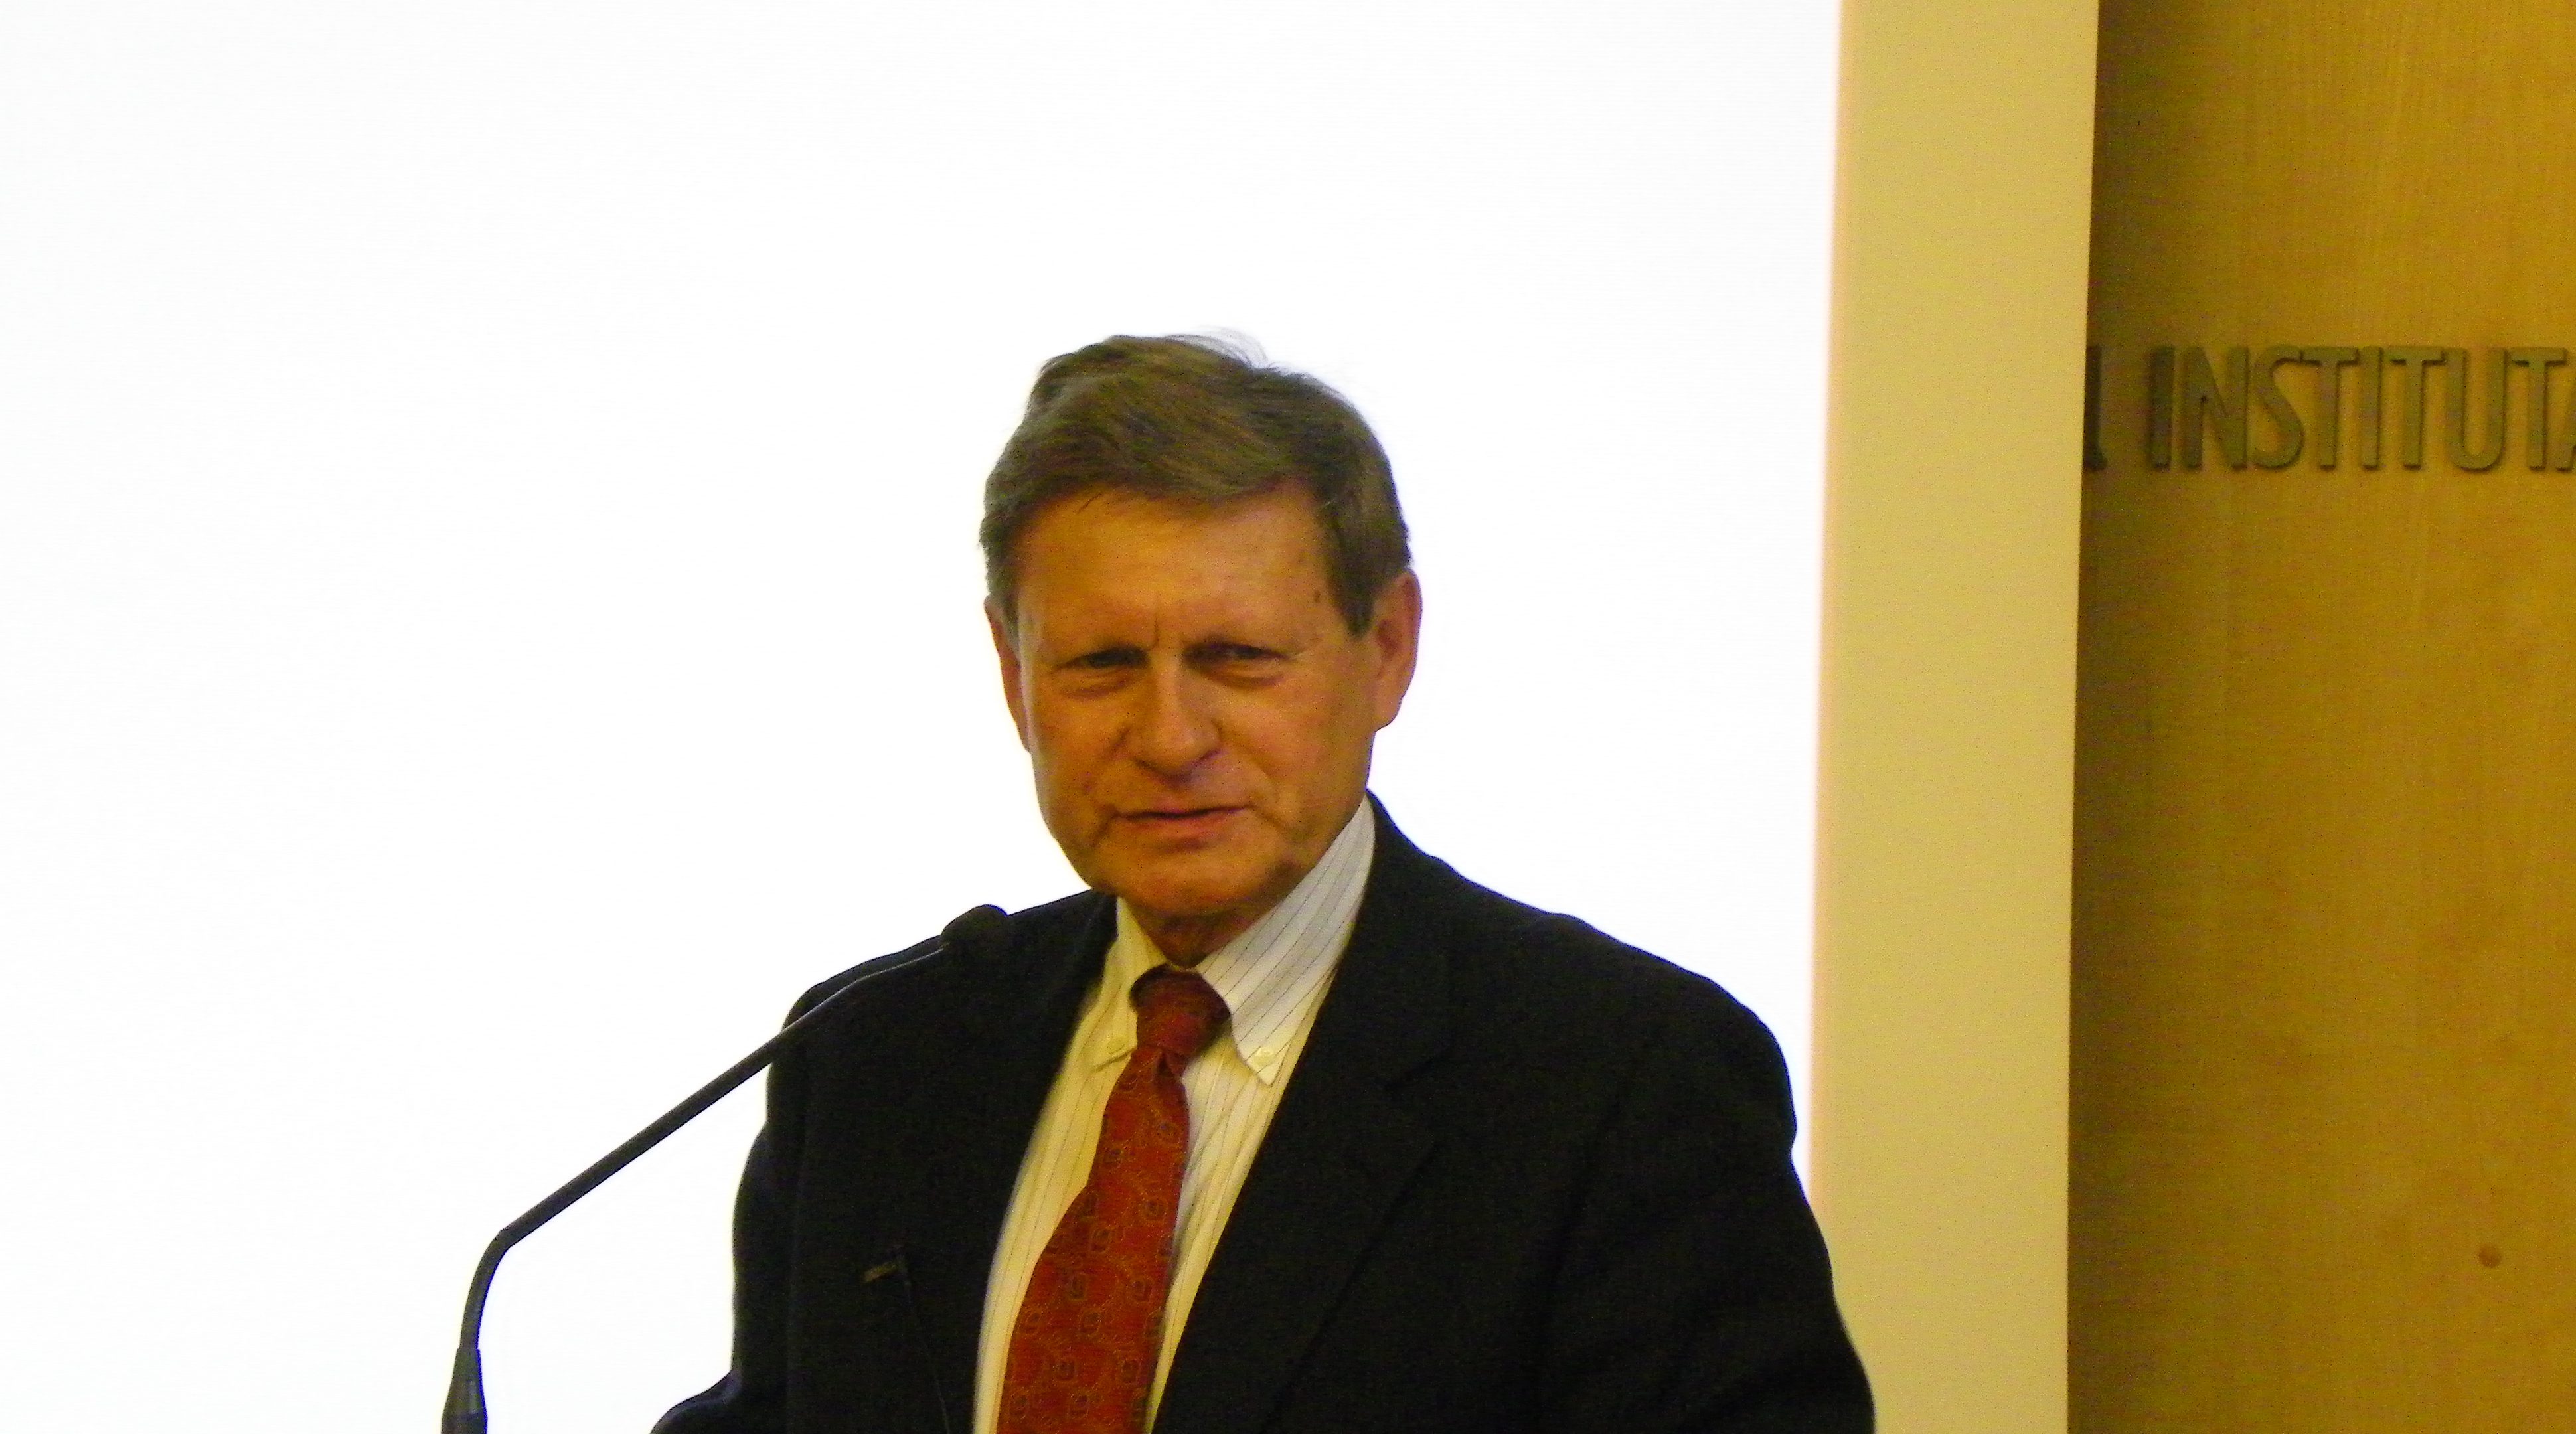 Prof. Leszek Balcerowicz paskaita „The ways out of the euro zone crisis and the interests of non-euro EU member states“